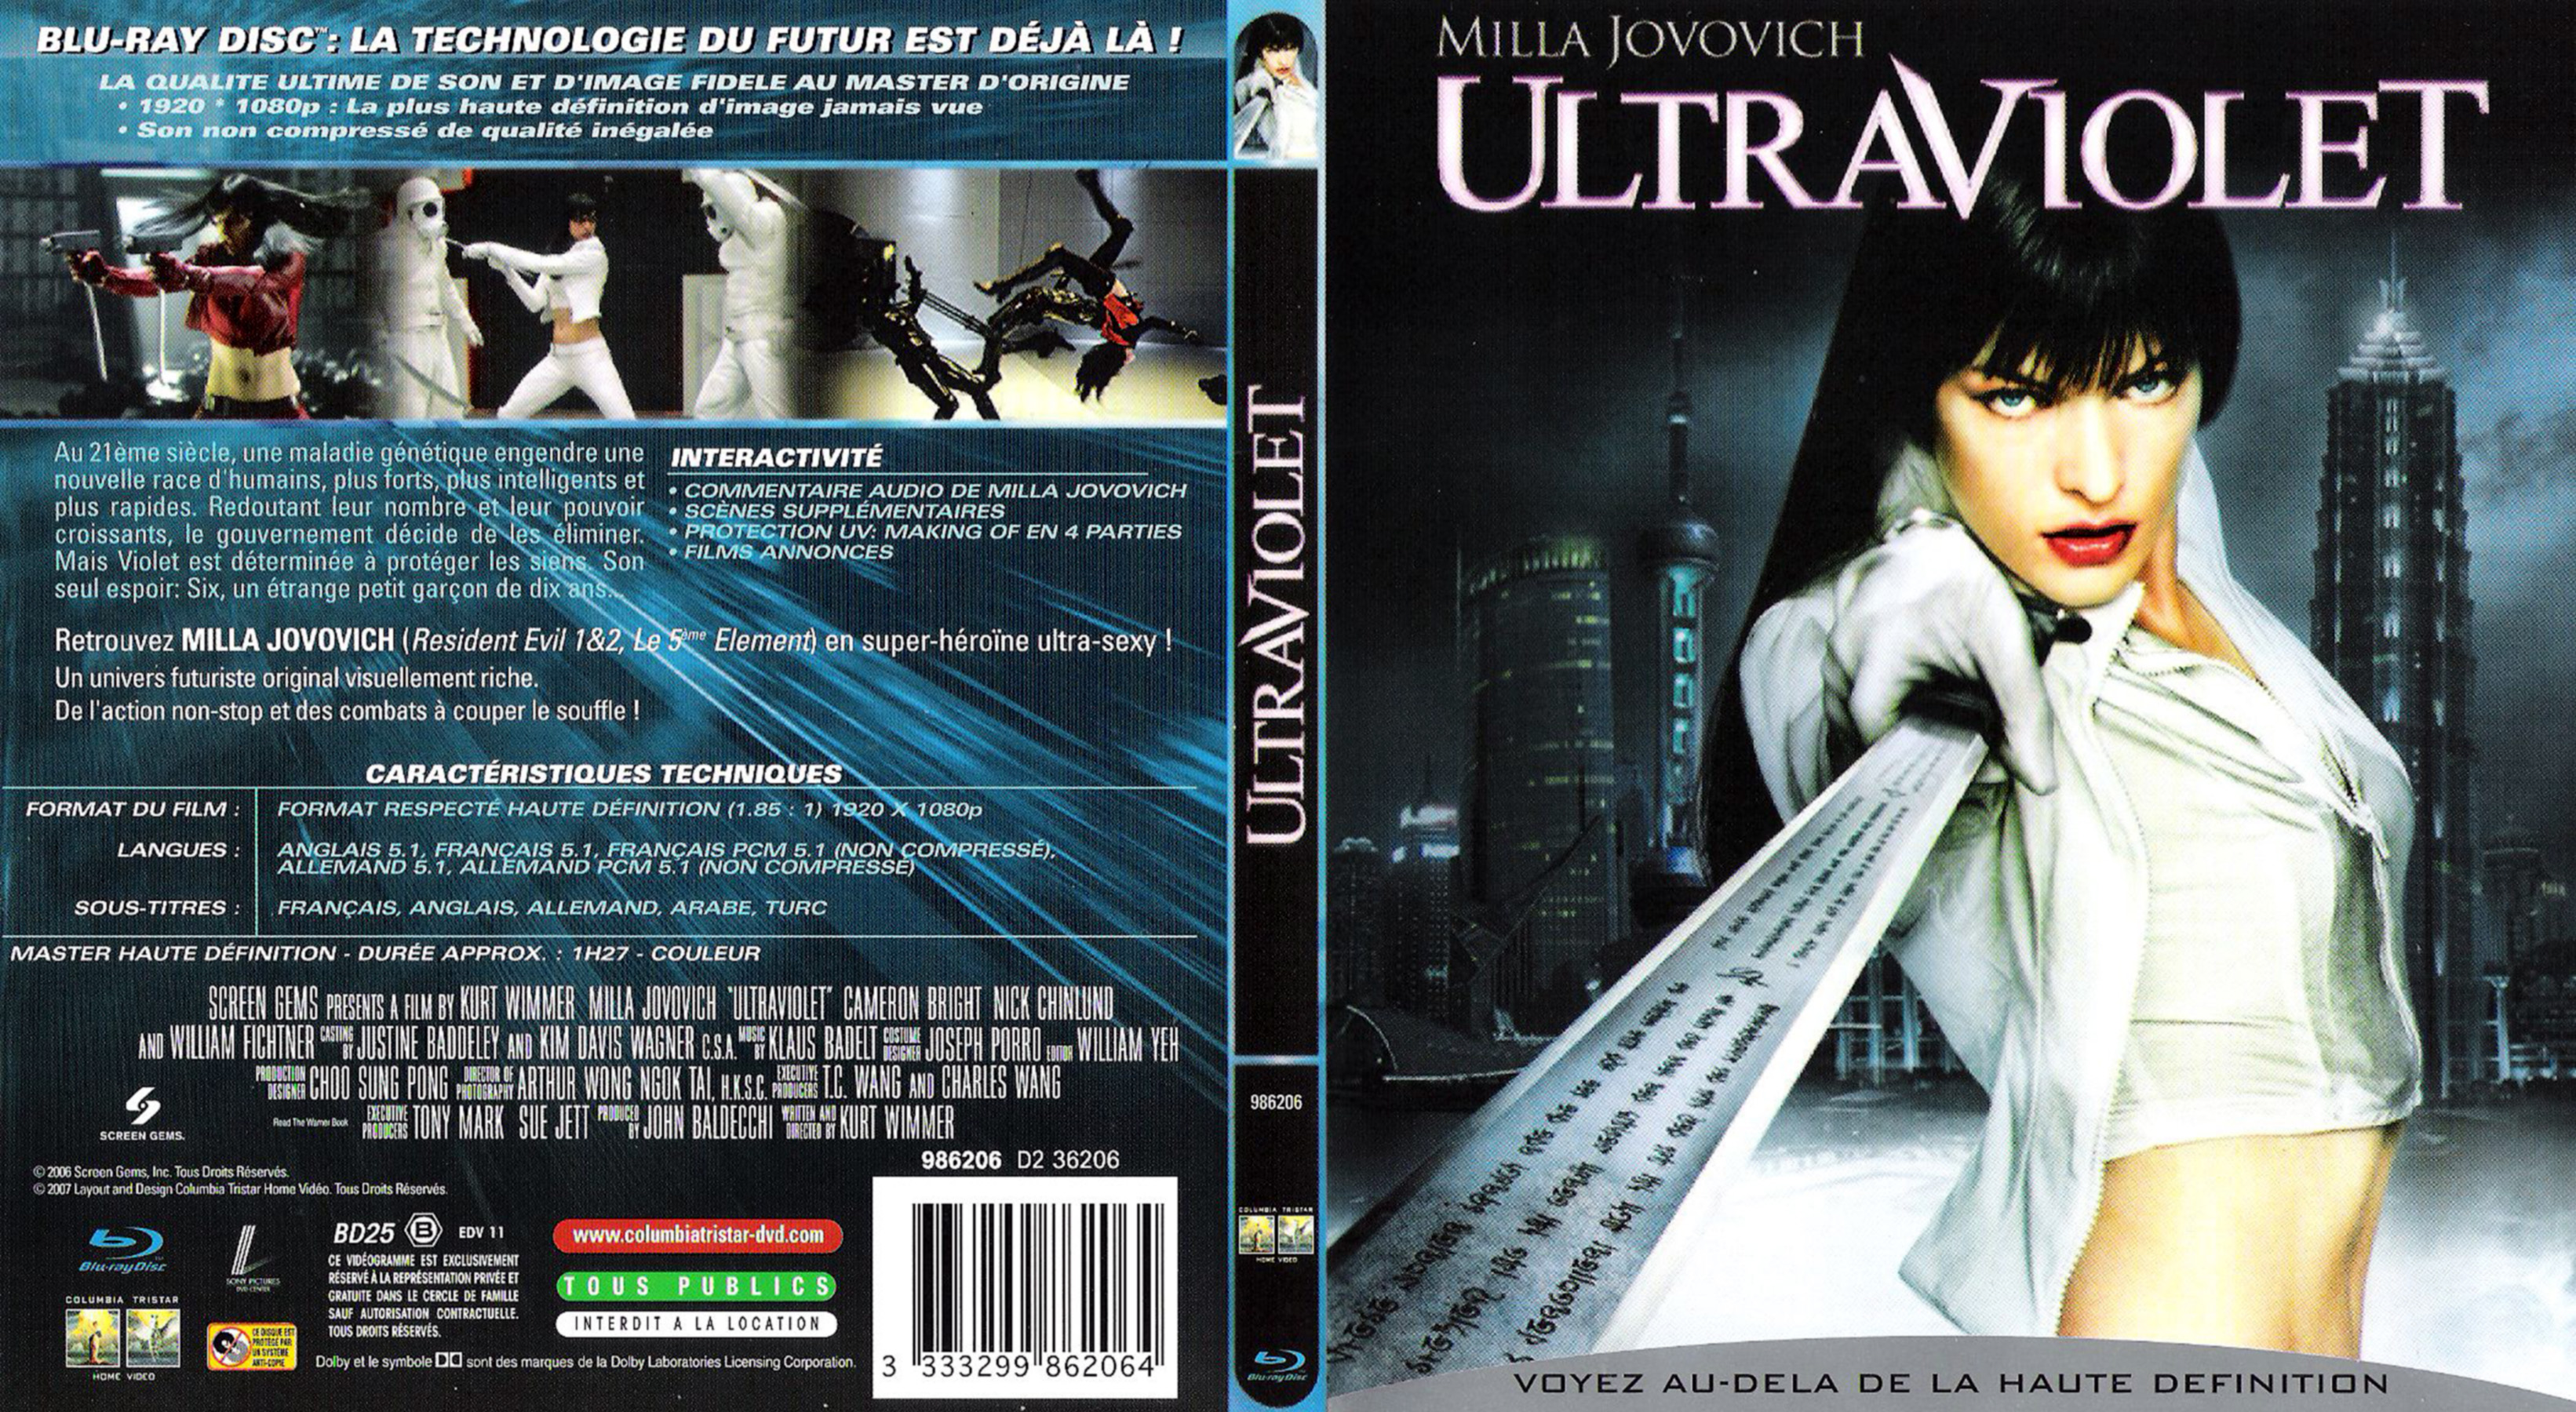 Jaquette DVD Ultraviolet (BLU-RAY)